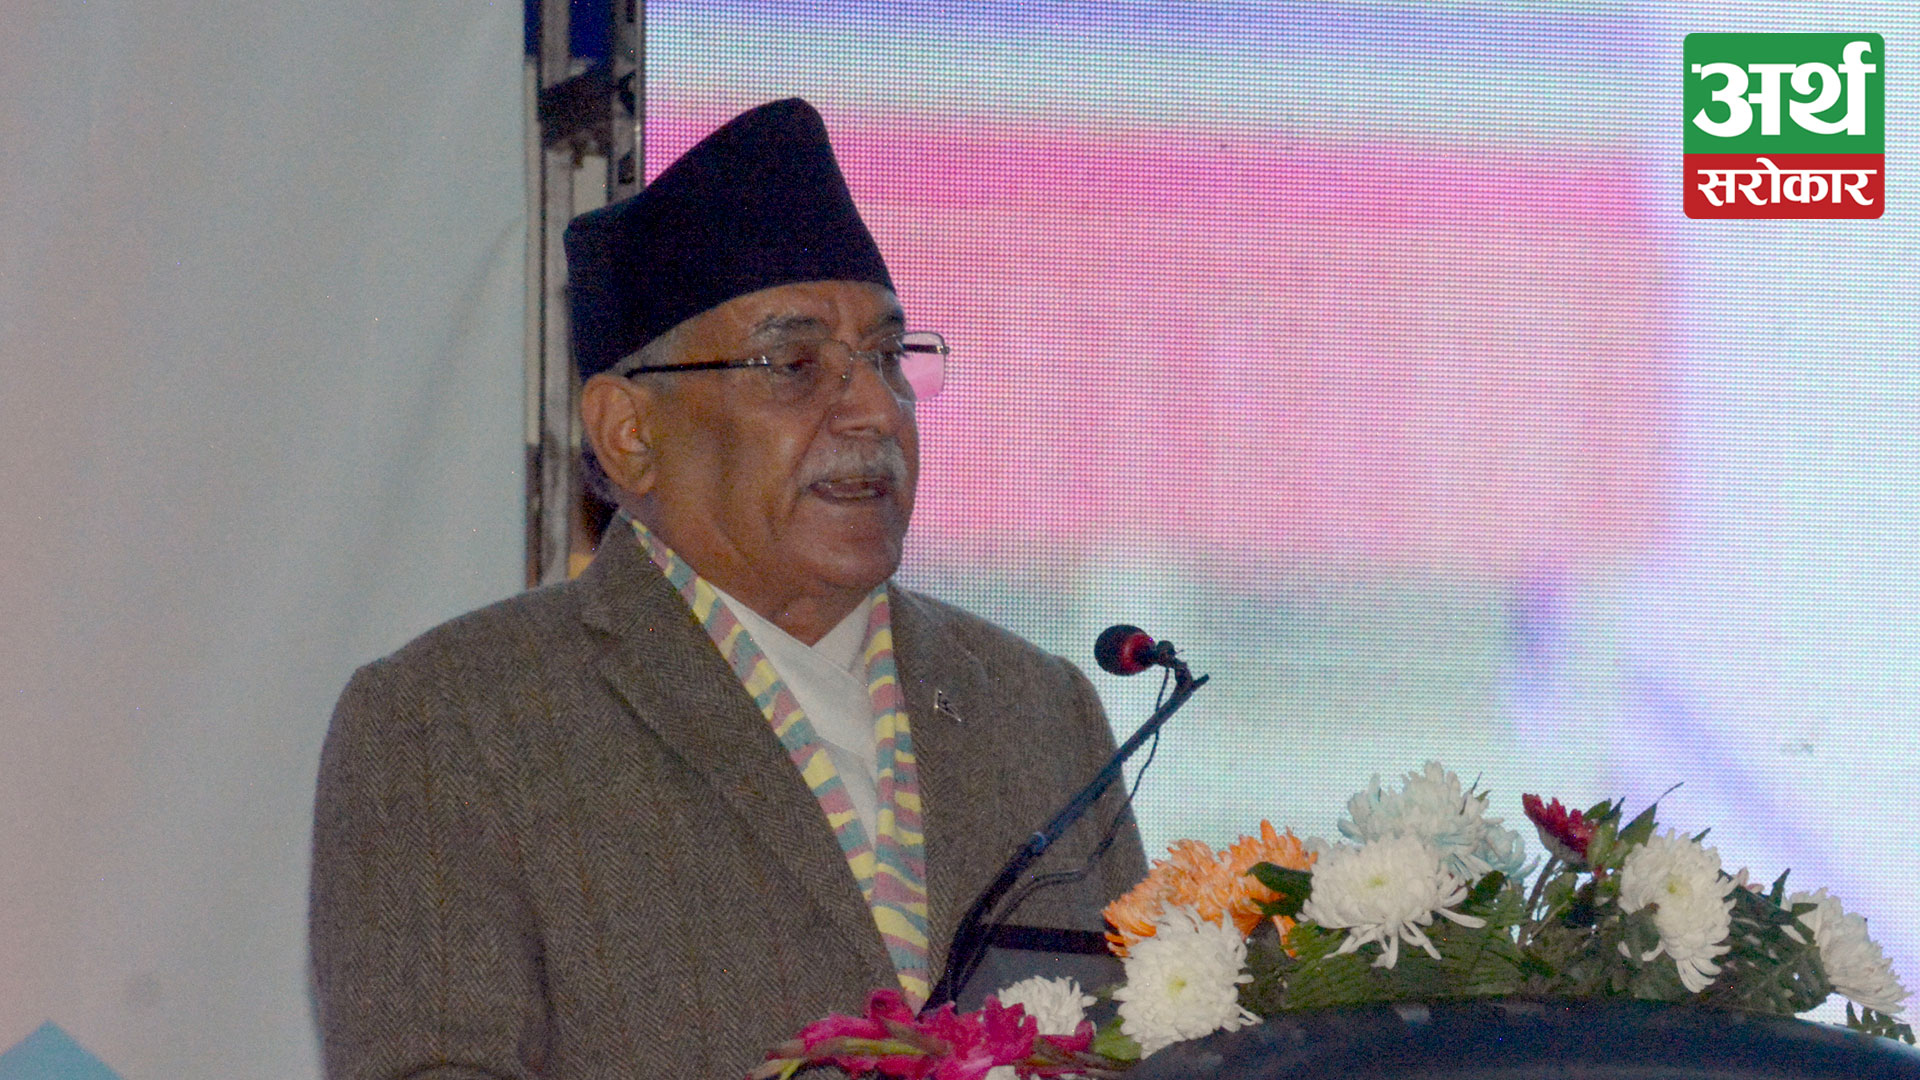 ‘Outflow of money from Nepal for higher education should be stopped’-PM Dahal